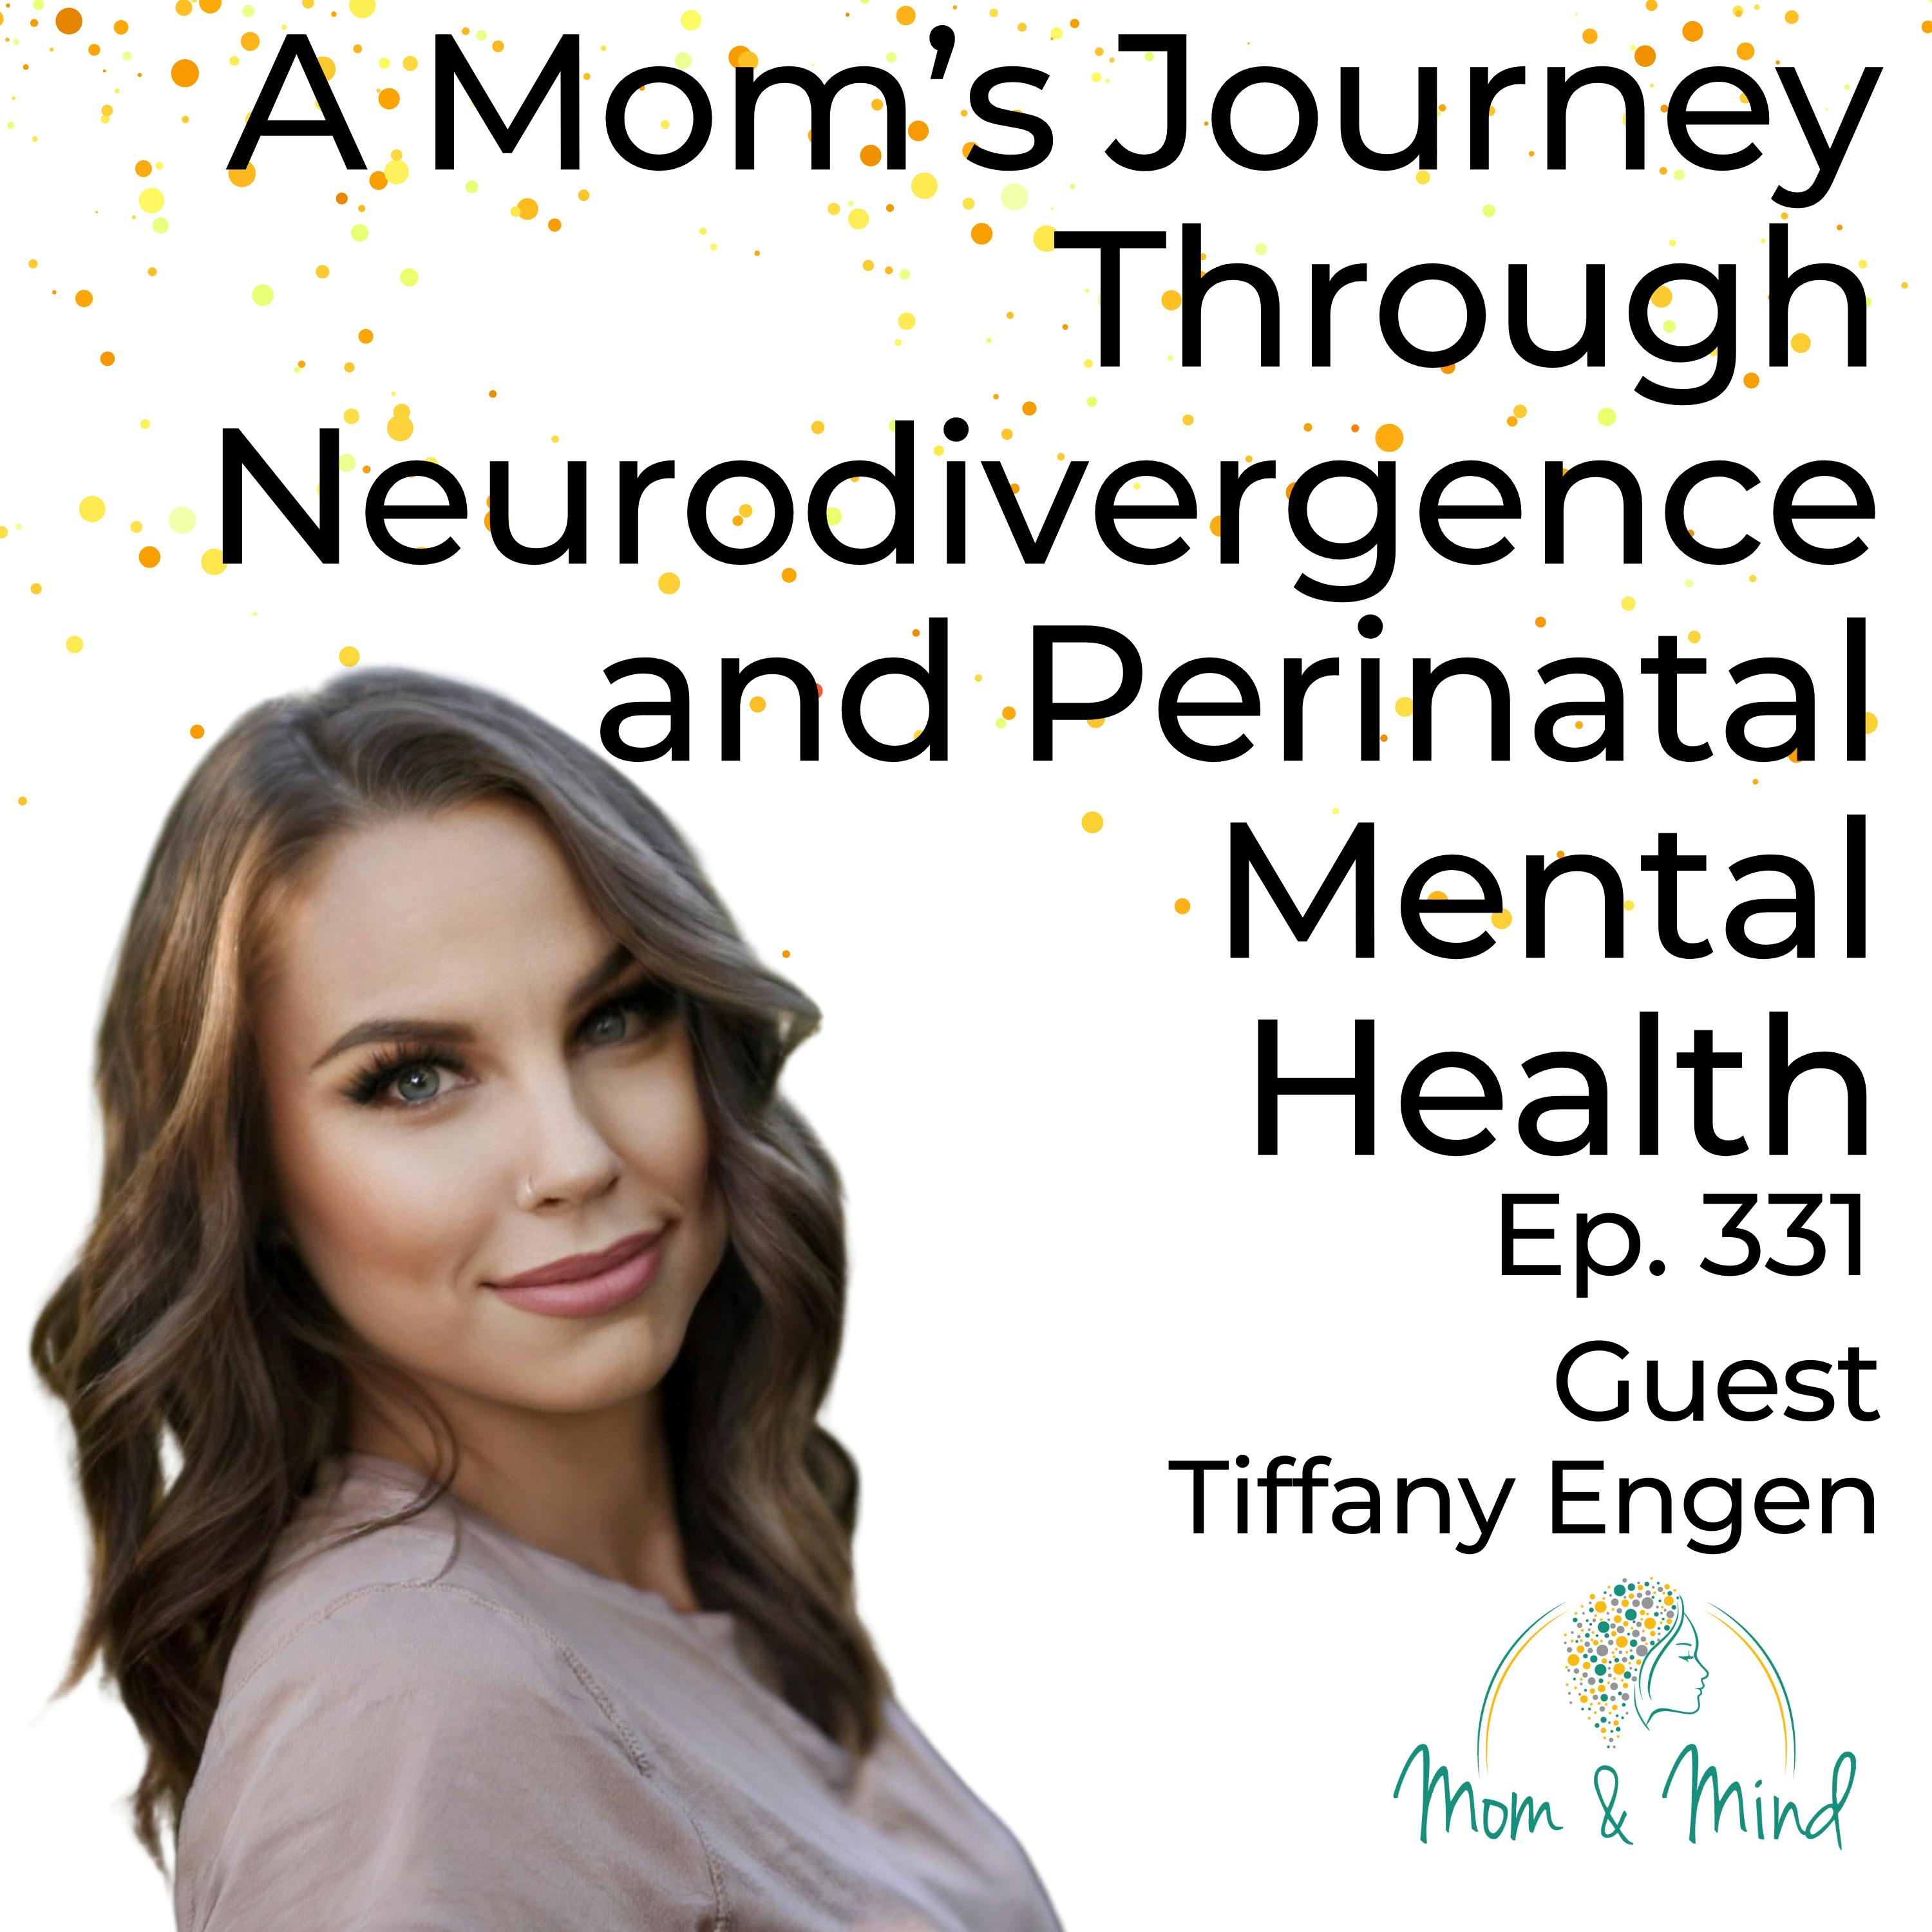 331: A Mom's Journey Through Neurodivergence and Perinatal Mental  Health